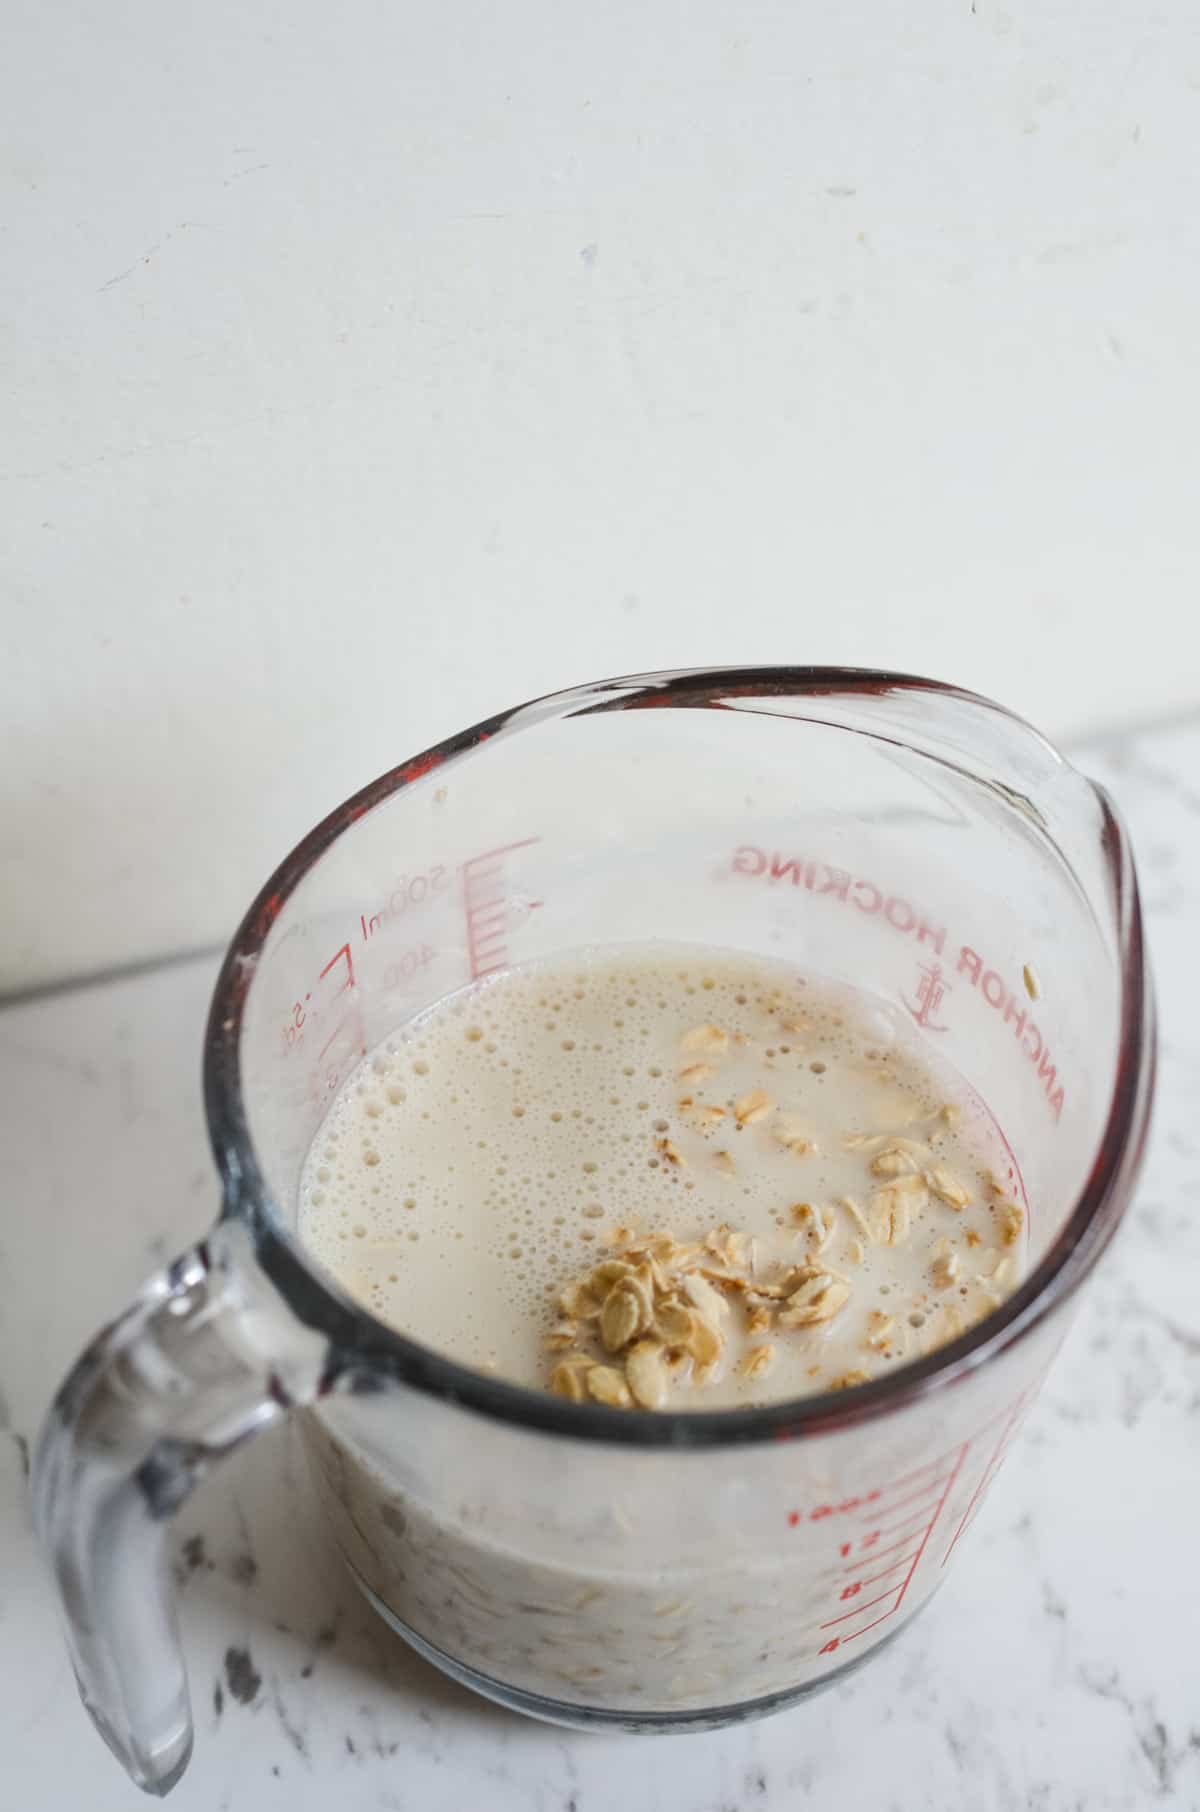 Milk and rolled oats in a measuring cup.